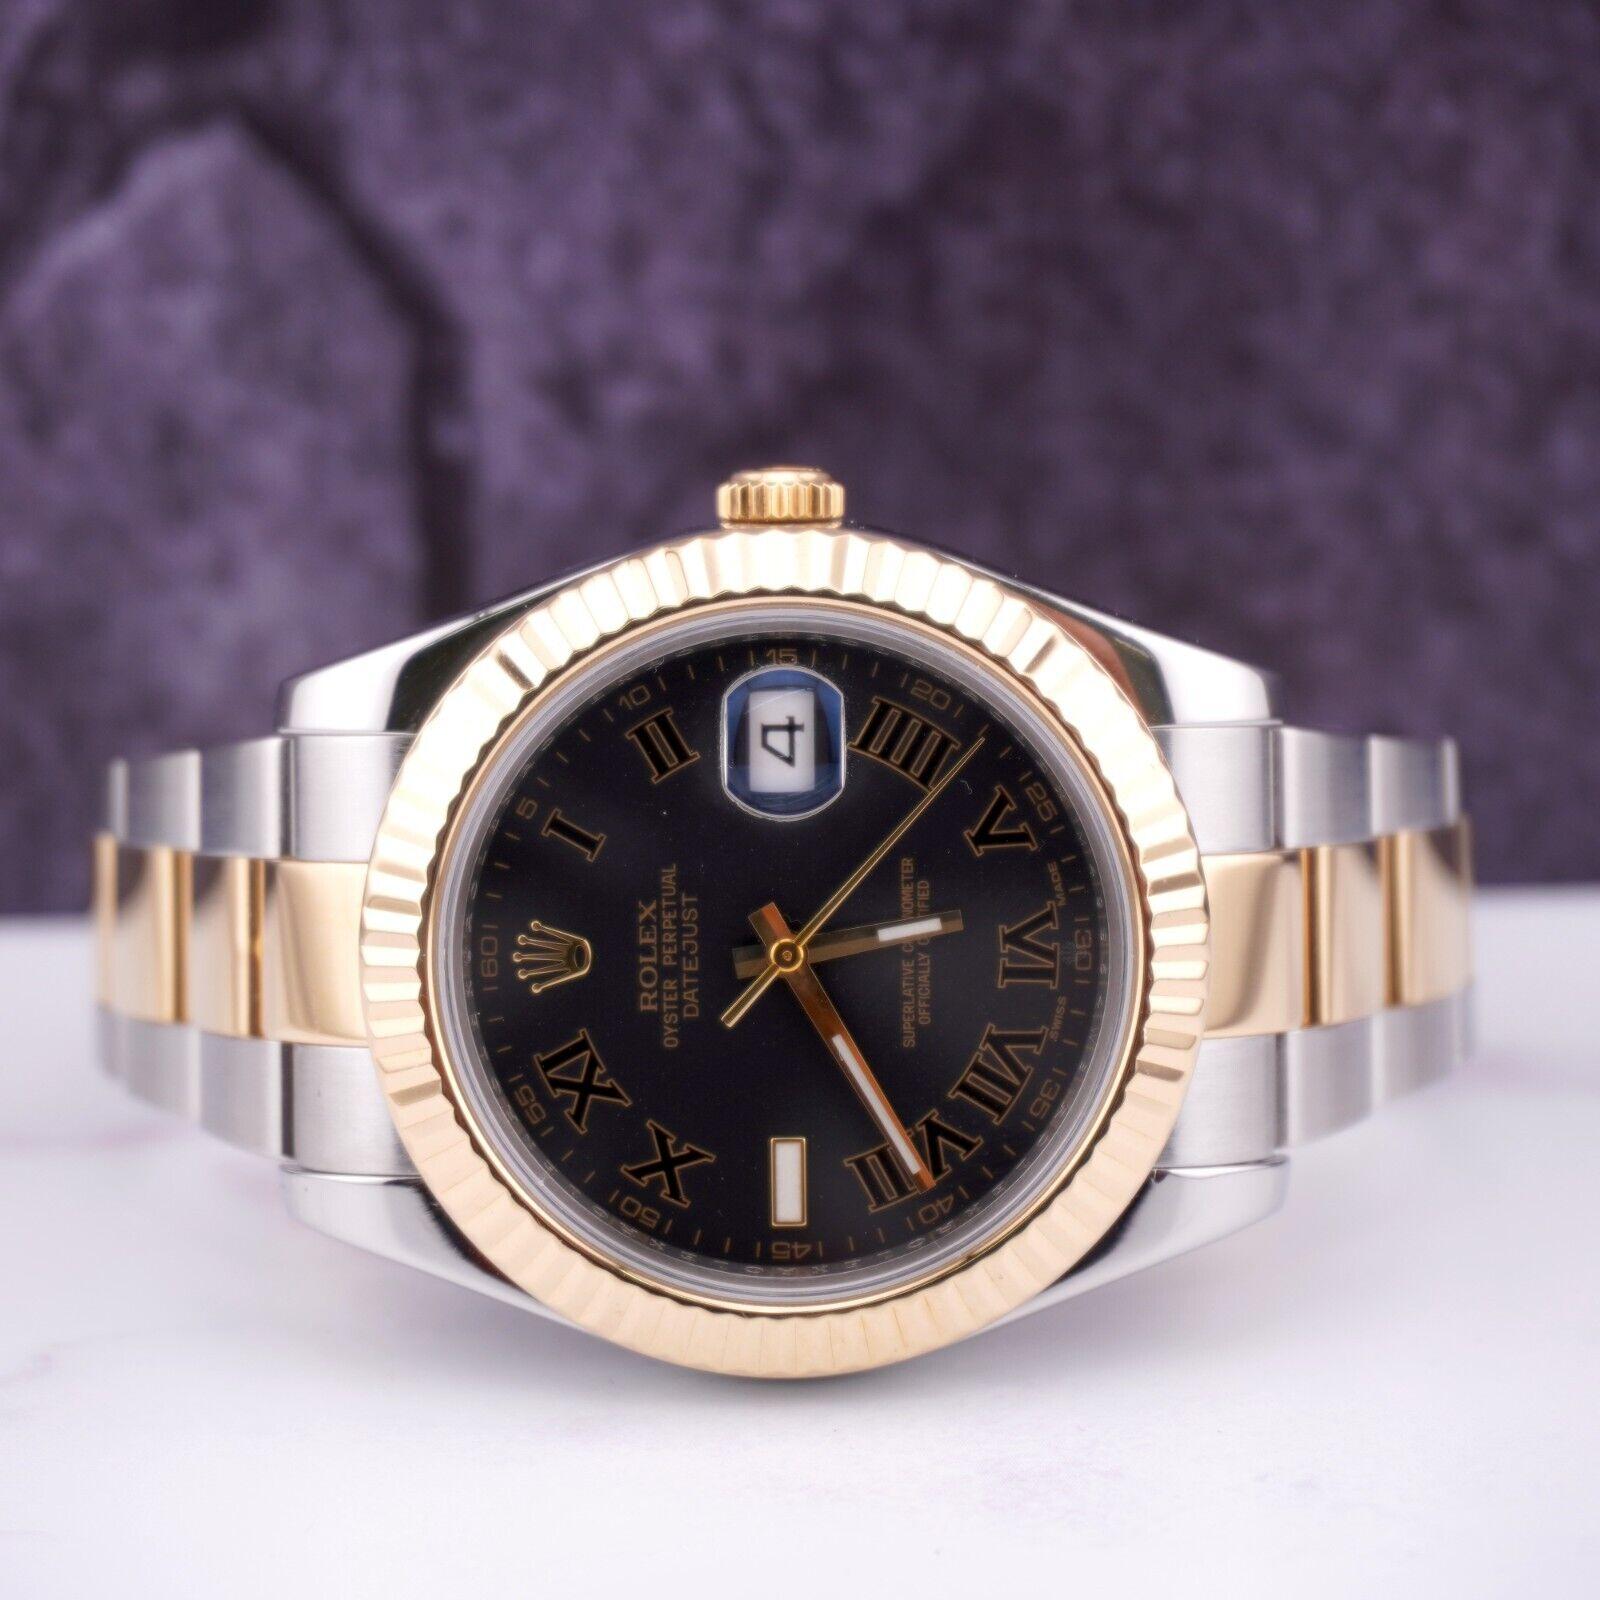 Rolex Datejust II 41mm Watch

Pre-owned w/ Gift Box
100% Authentic Authenticity Card
Condition - (Great Condition) - See Pics
Watch Reference - 116333
Model - Datejust ll
Dial Color - Black
Material - 18k Yellow Gold/Stainless Steel
Watch Will Fit